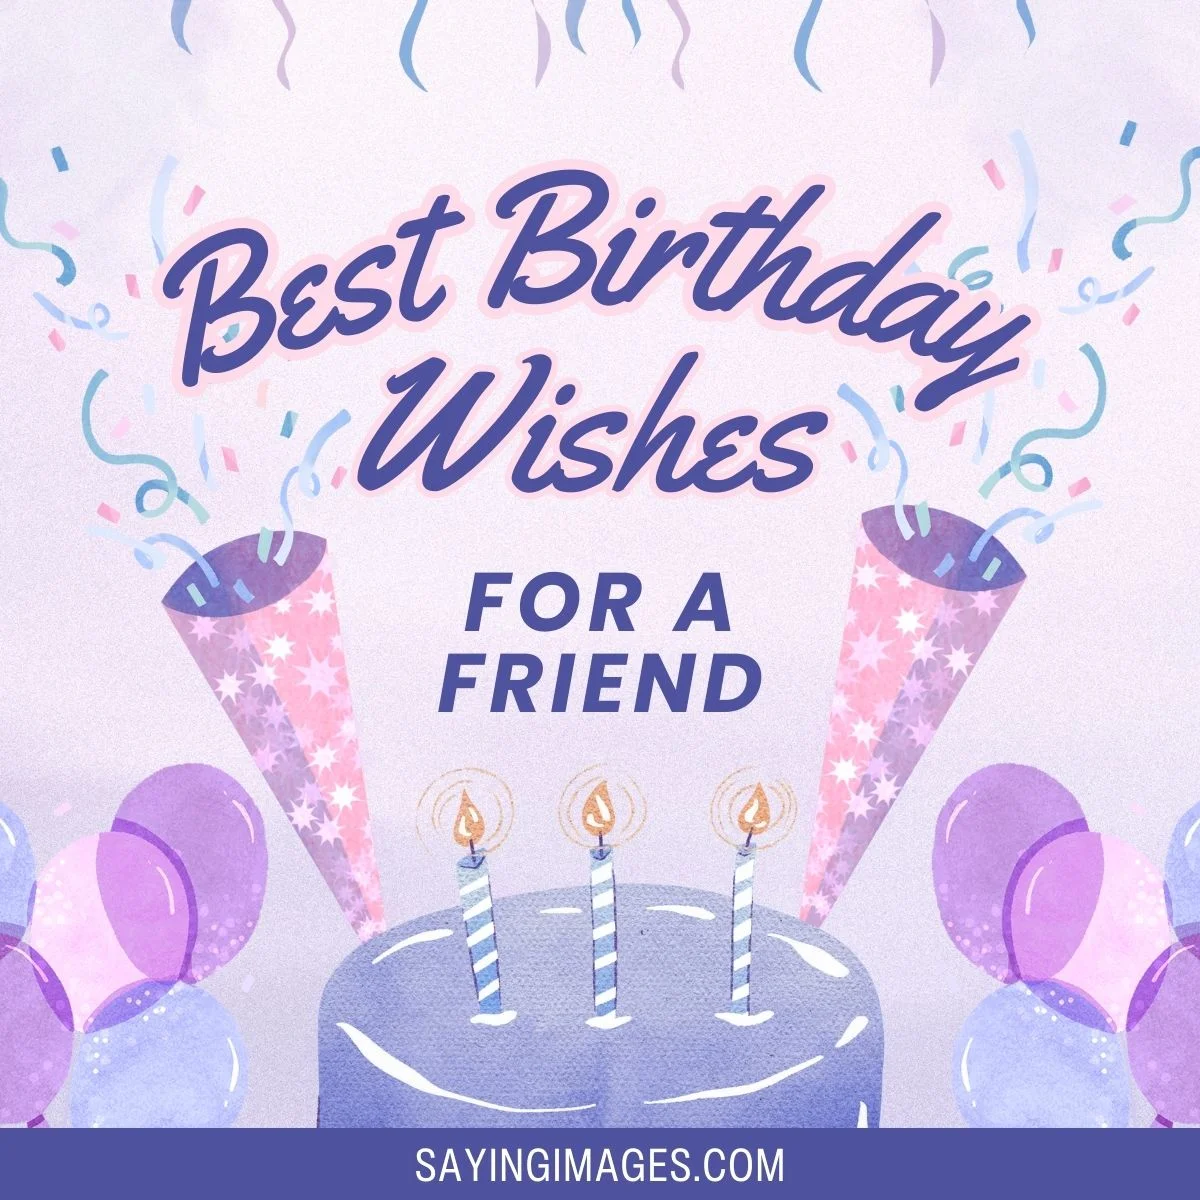 60 Best Birthday Wishes for a Friend